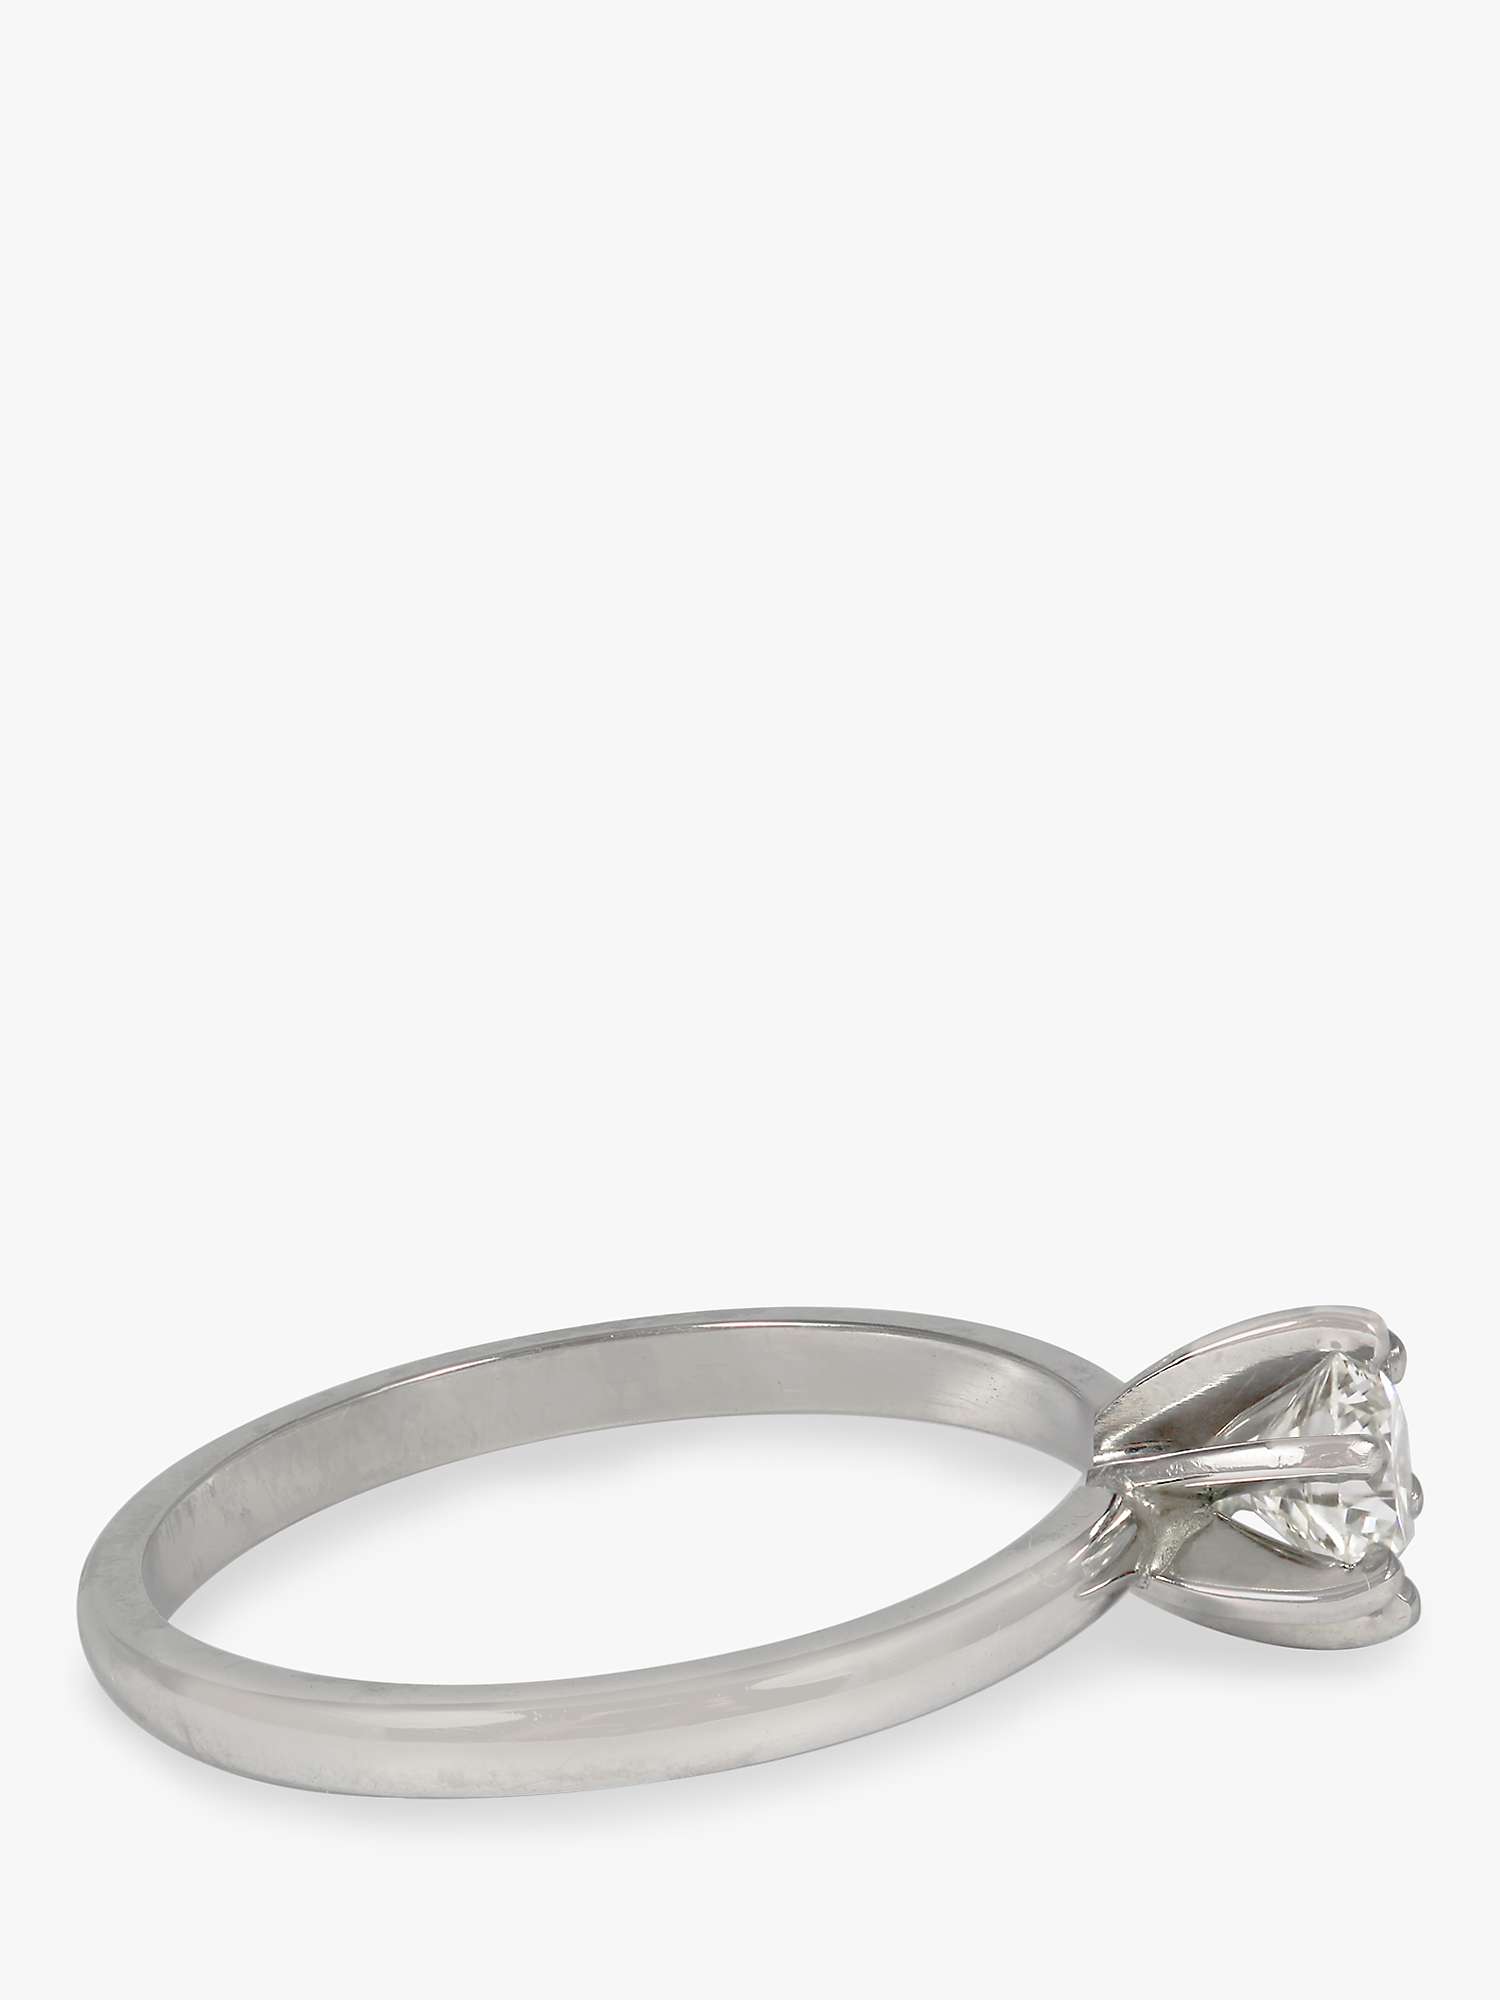 Buy Kojis 14ct White Gold Solitaire Diamond Second Hand Ring, Dated 2000 Online at johnlewis.com